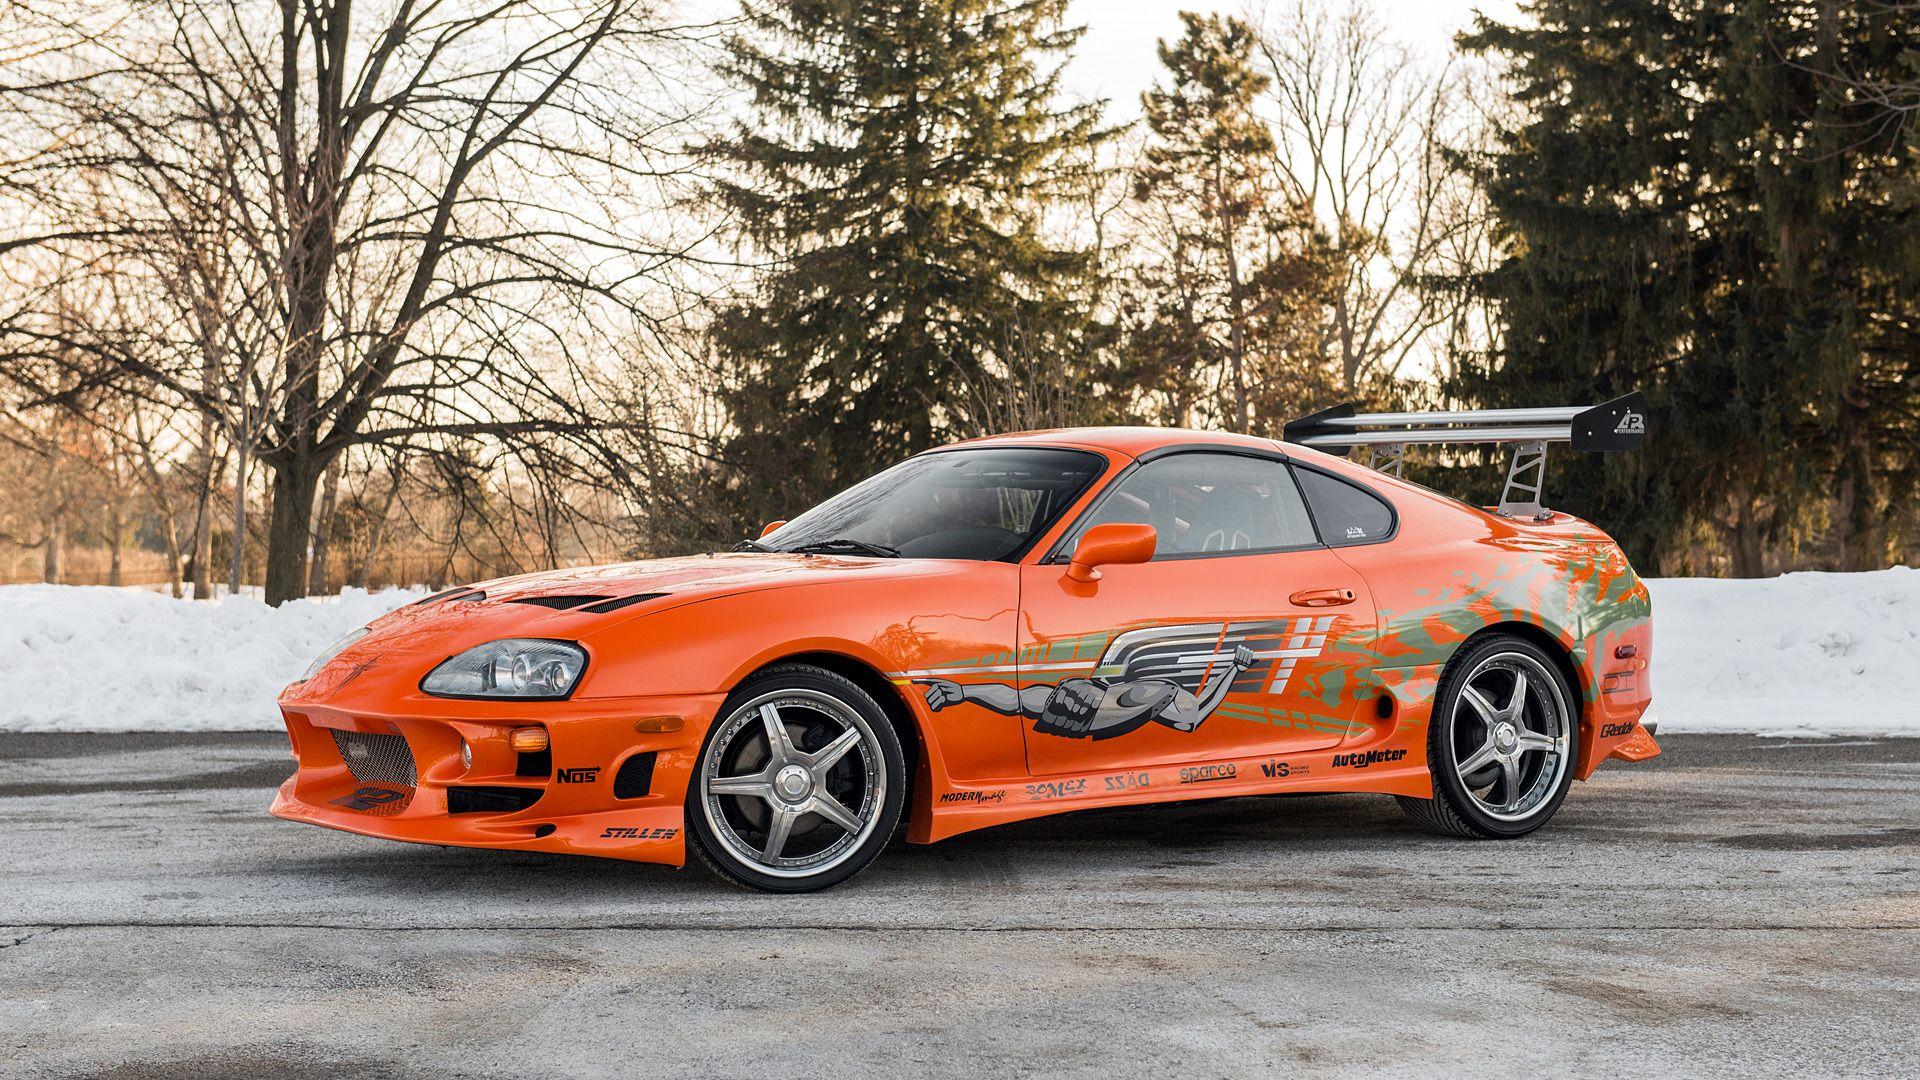 Toyota Supra 'The Fast and the Furious' Wallpaper & HD Image